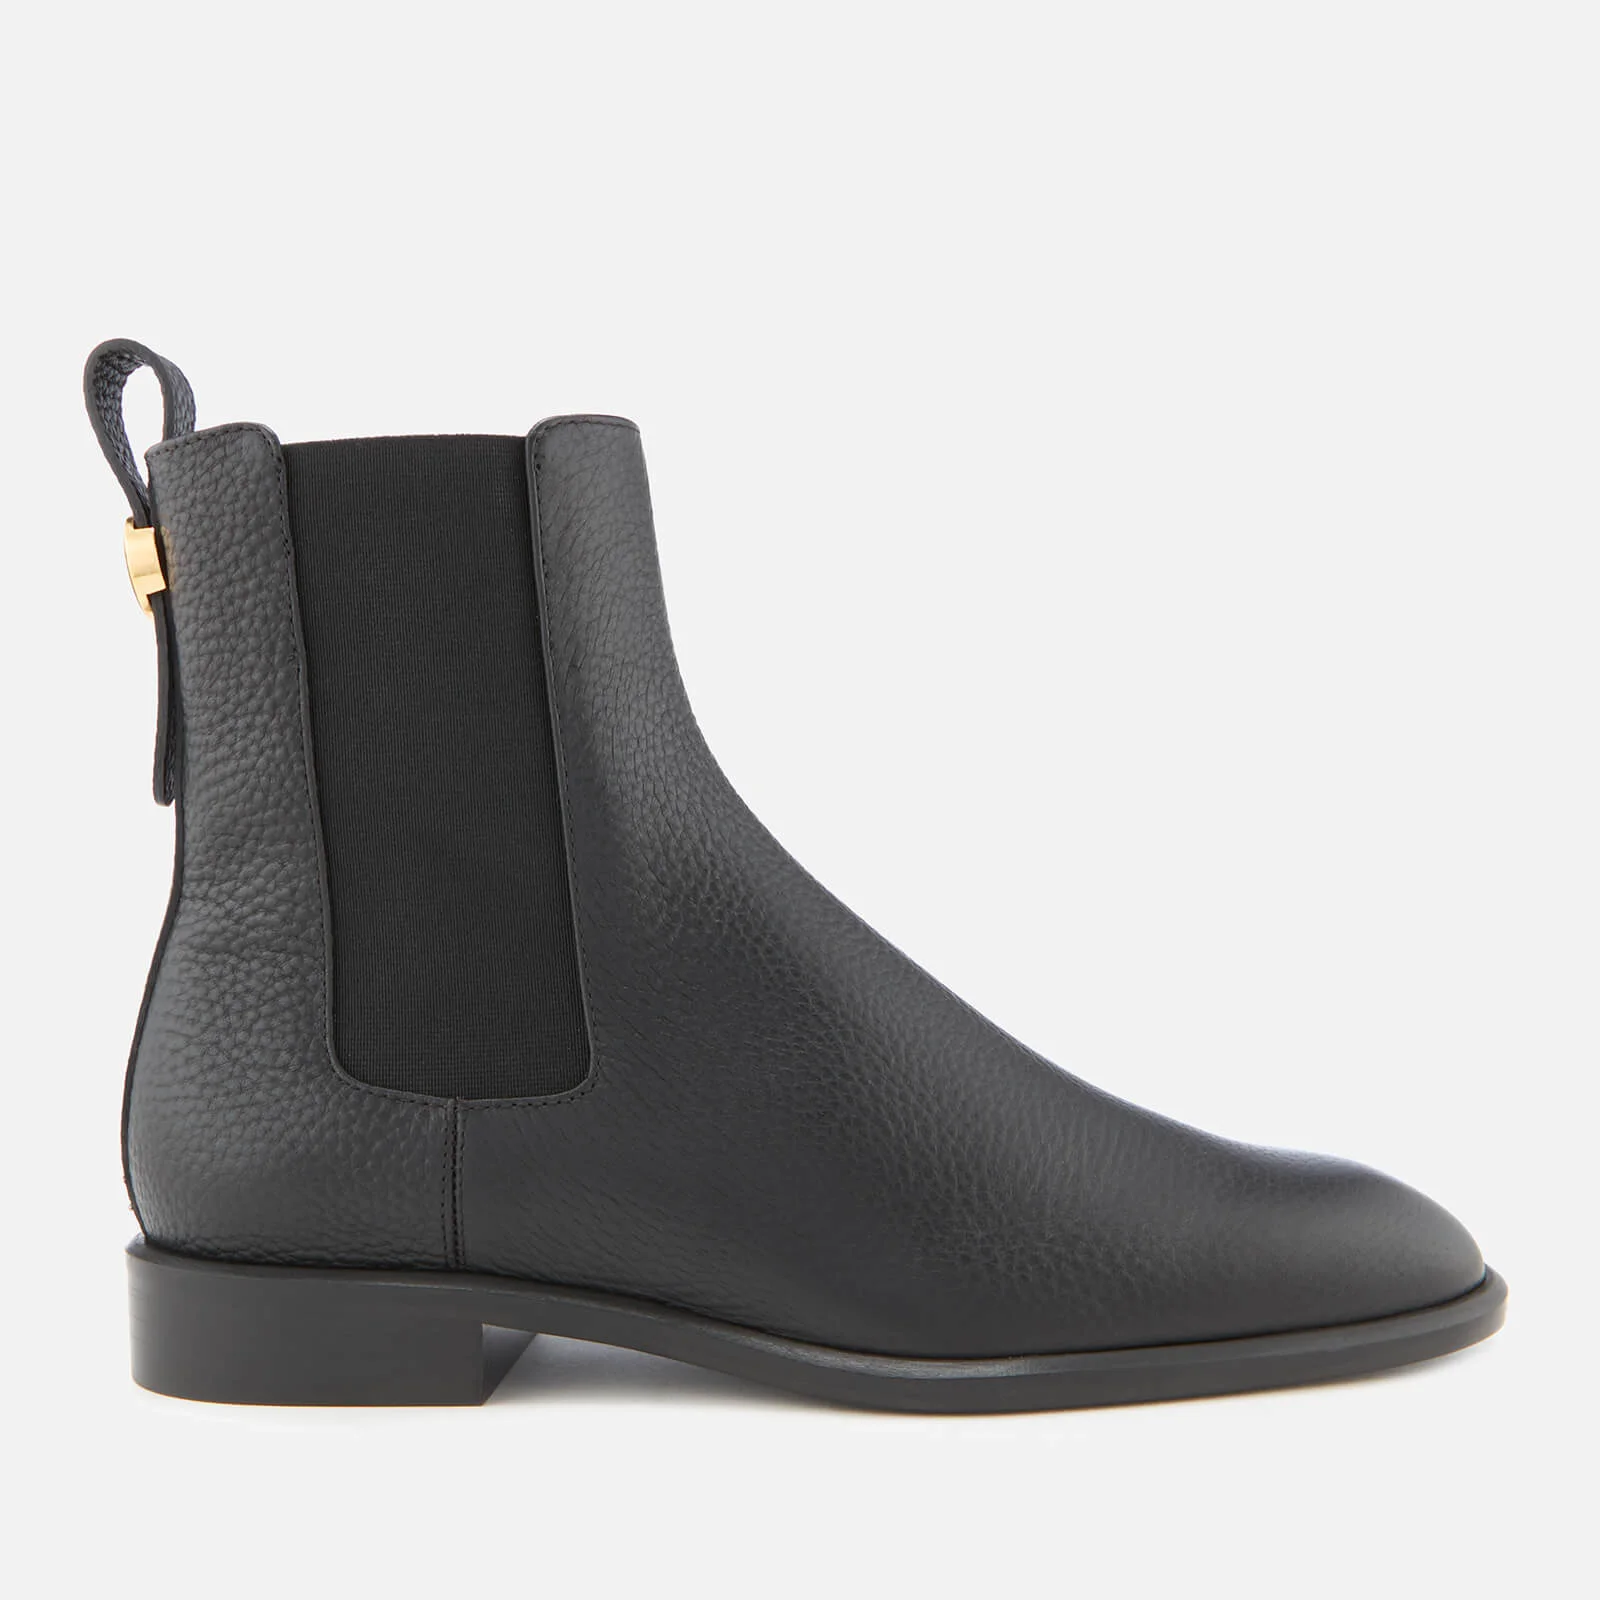 Mulberry Women's Leather Chelsea Boots - Black Image 1